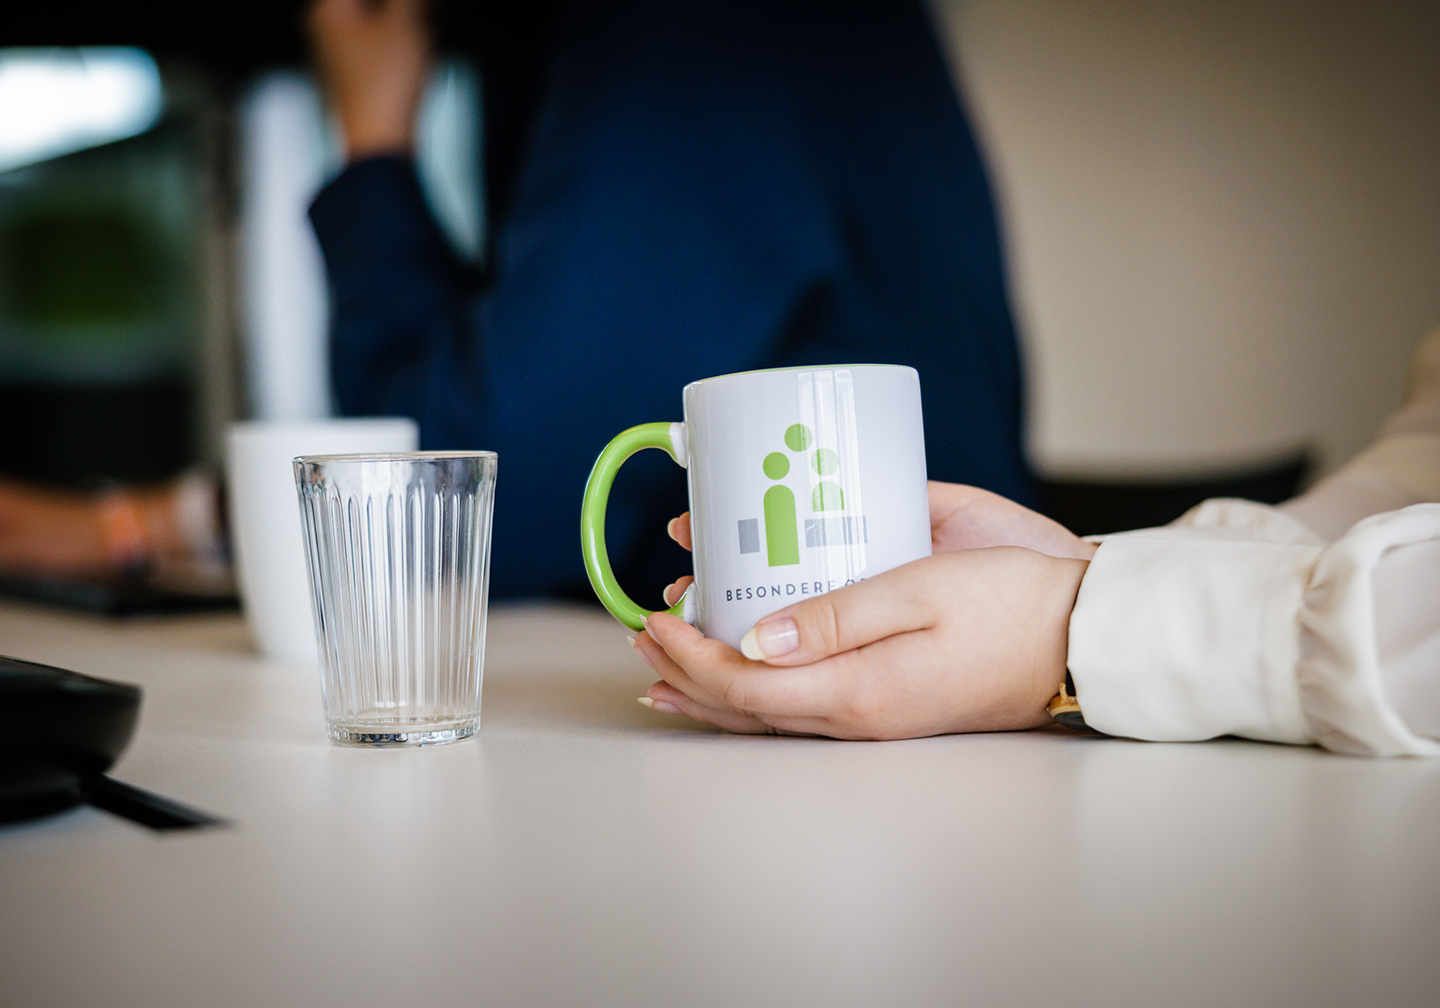 One hand holds a white cup with a green logo on it